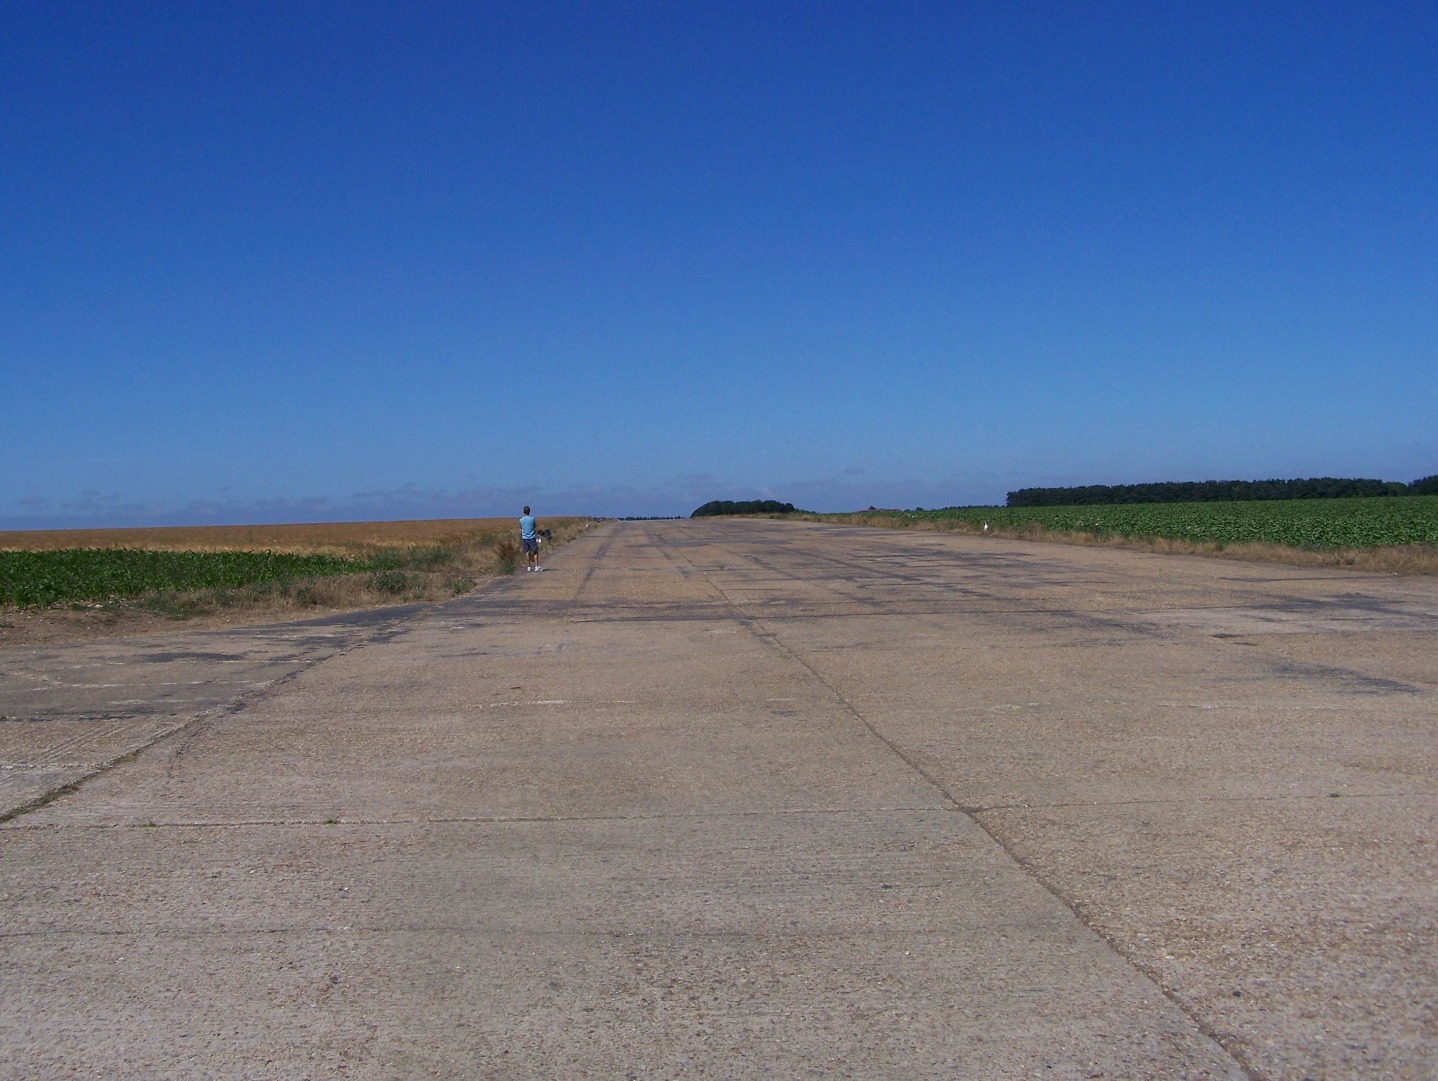 003South-west end of 04:22 runway, measuring 1,400 yards, and still partly active 15:07:2006.JPG